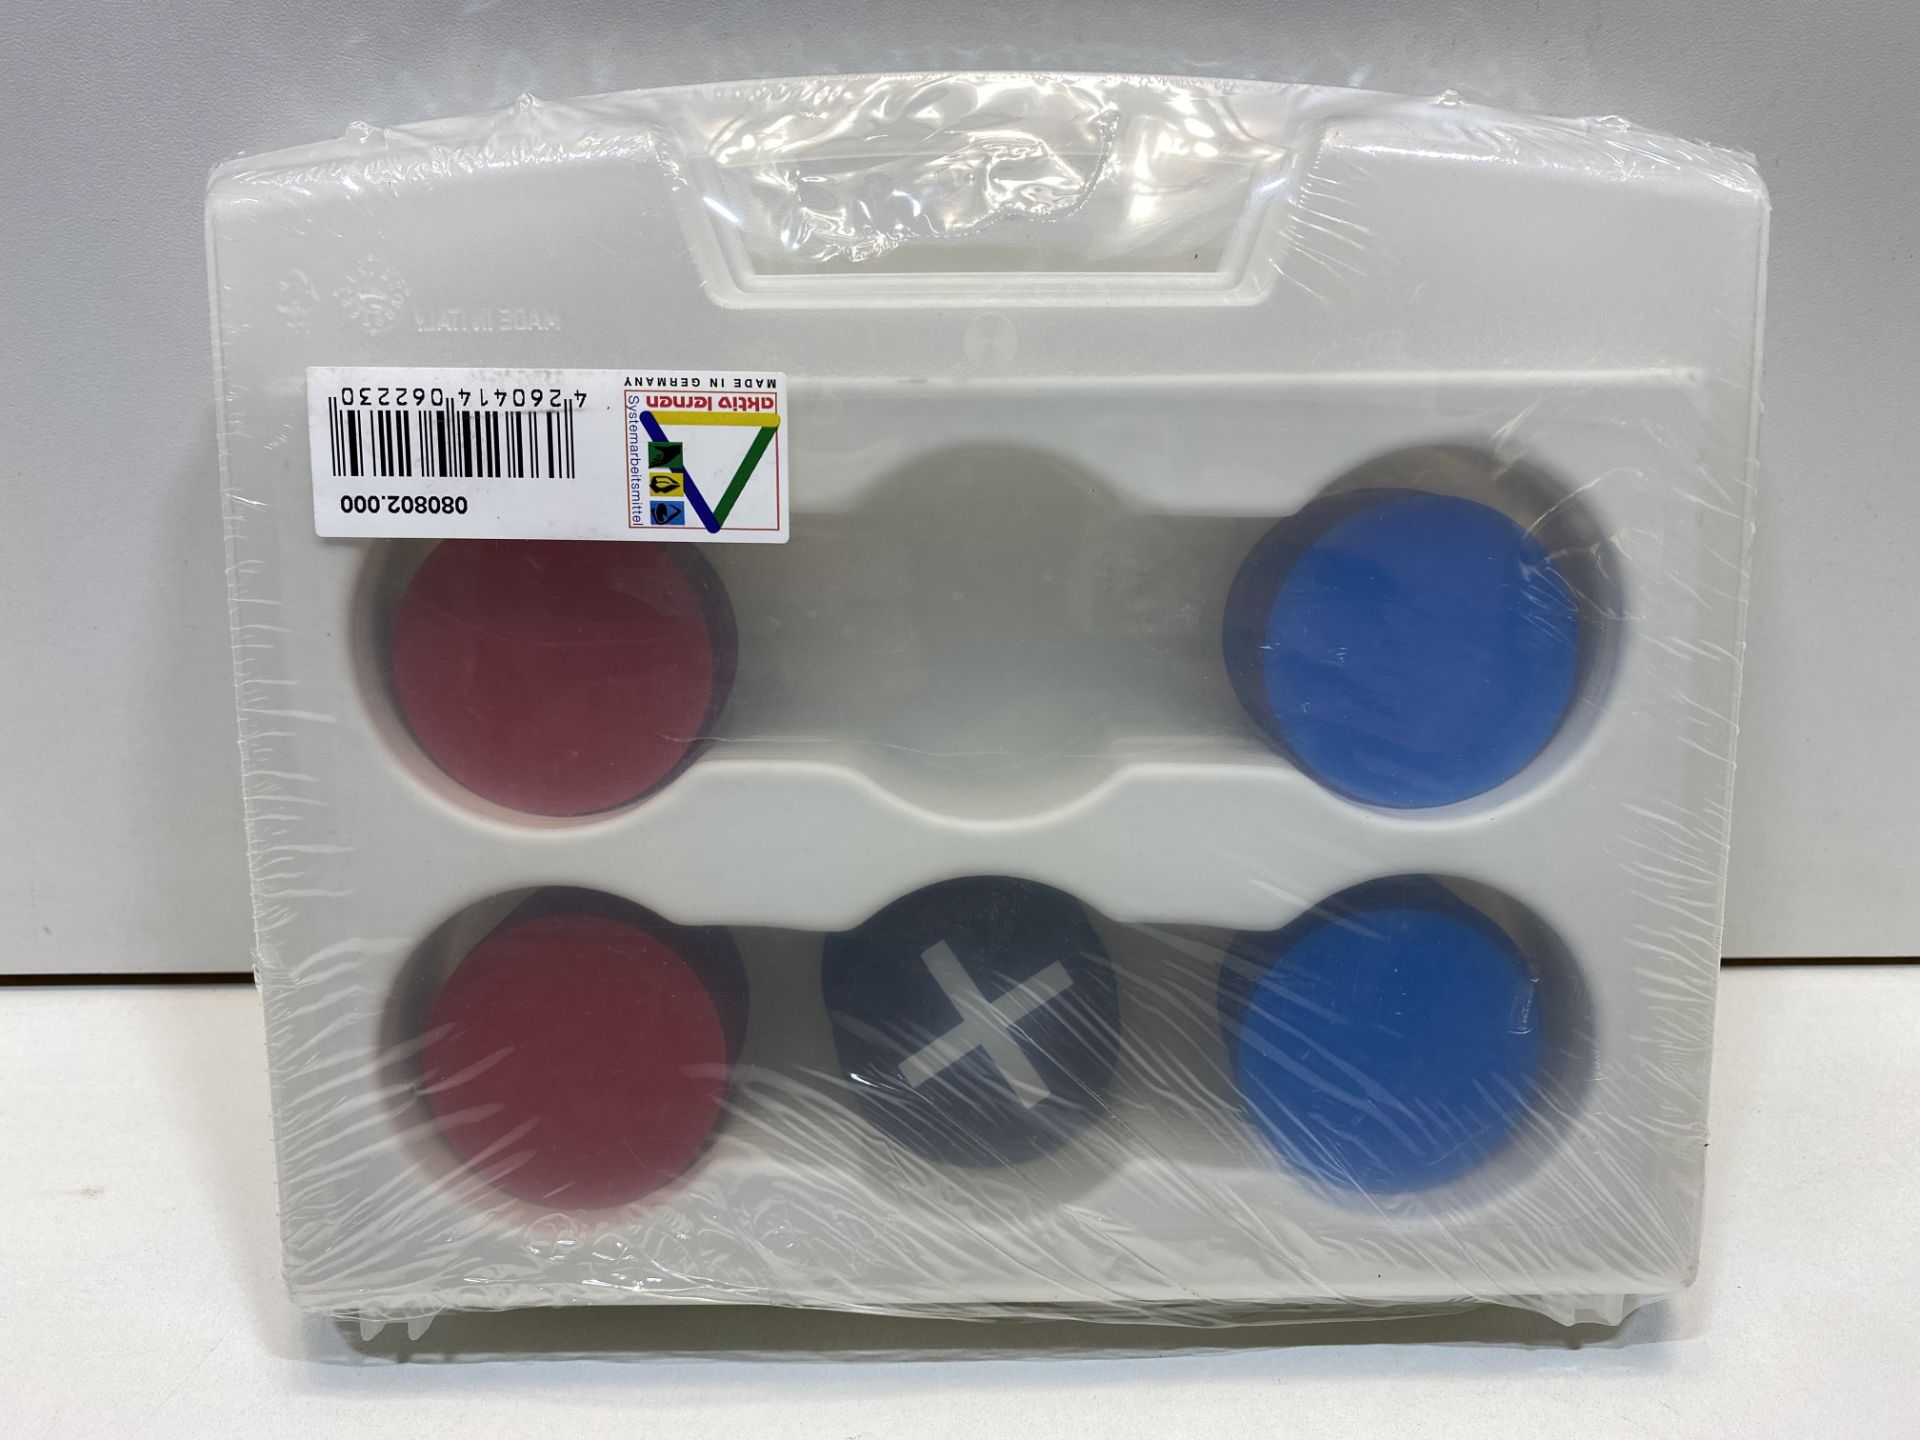 4 x WISSNER active learning 080802.000 Counting Chip Set II, Magnetic, Multi-Color |4260414062230 - Image 4 of 4